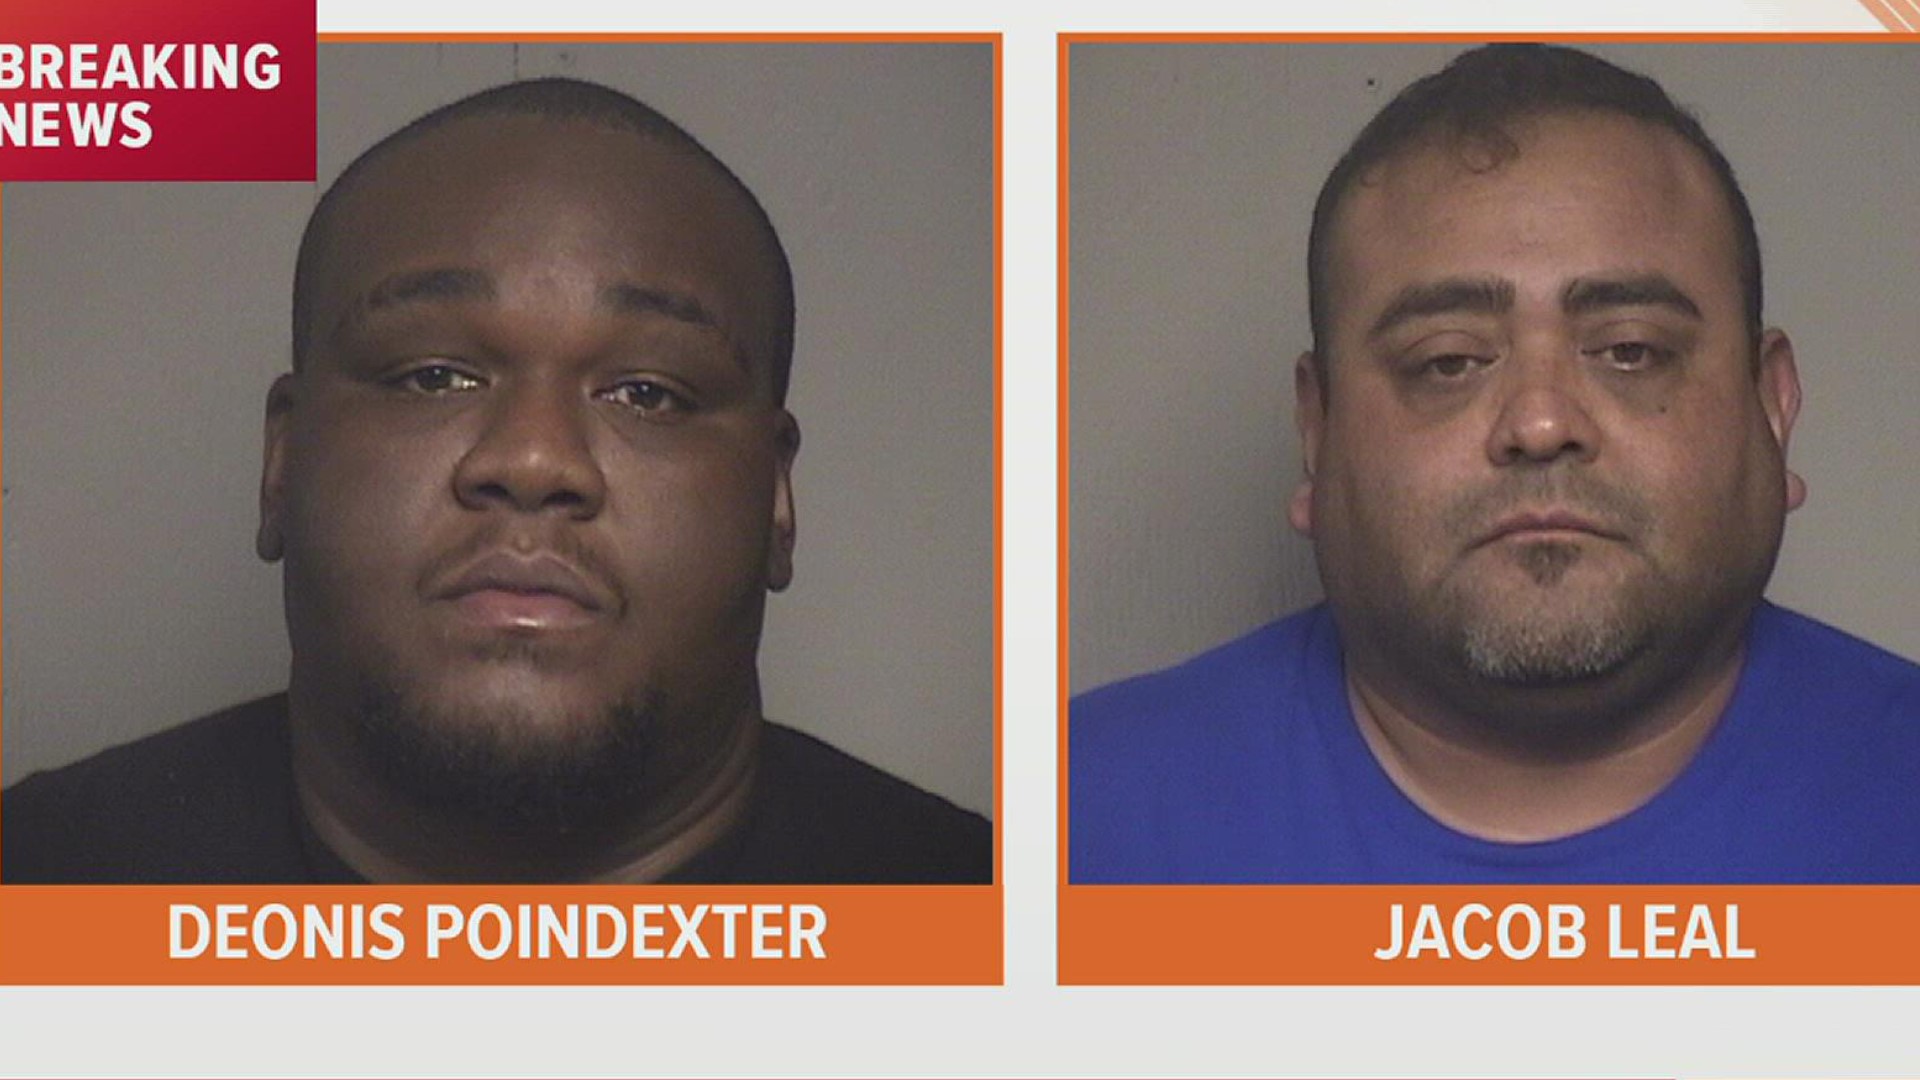 29-year-old Deonis Poindexter and 43-year-old Jacob Leal were arrested on Jan. 2 after an investigation found they illegally fired weapons on NYE.